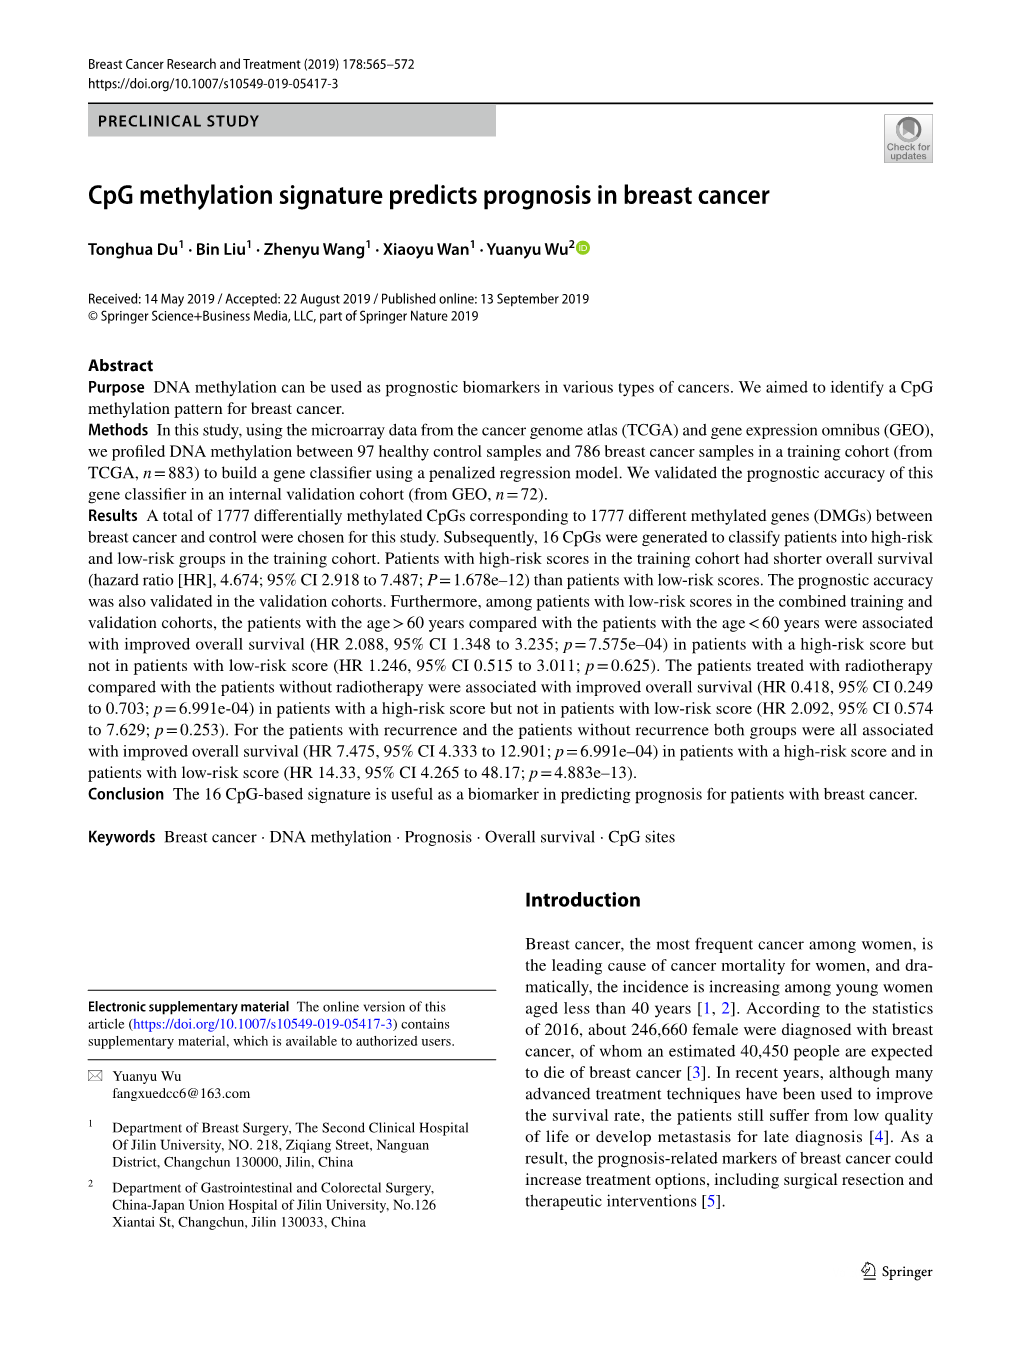 Cpg Methylation Signature Predicts Prognosis in Breast Cancer